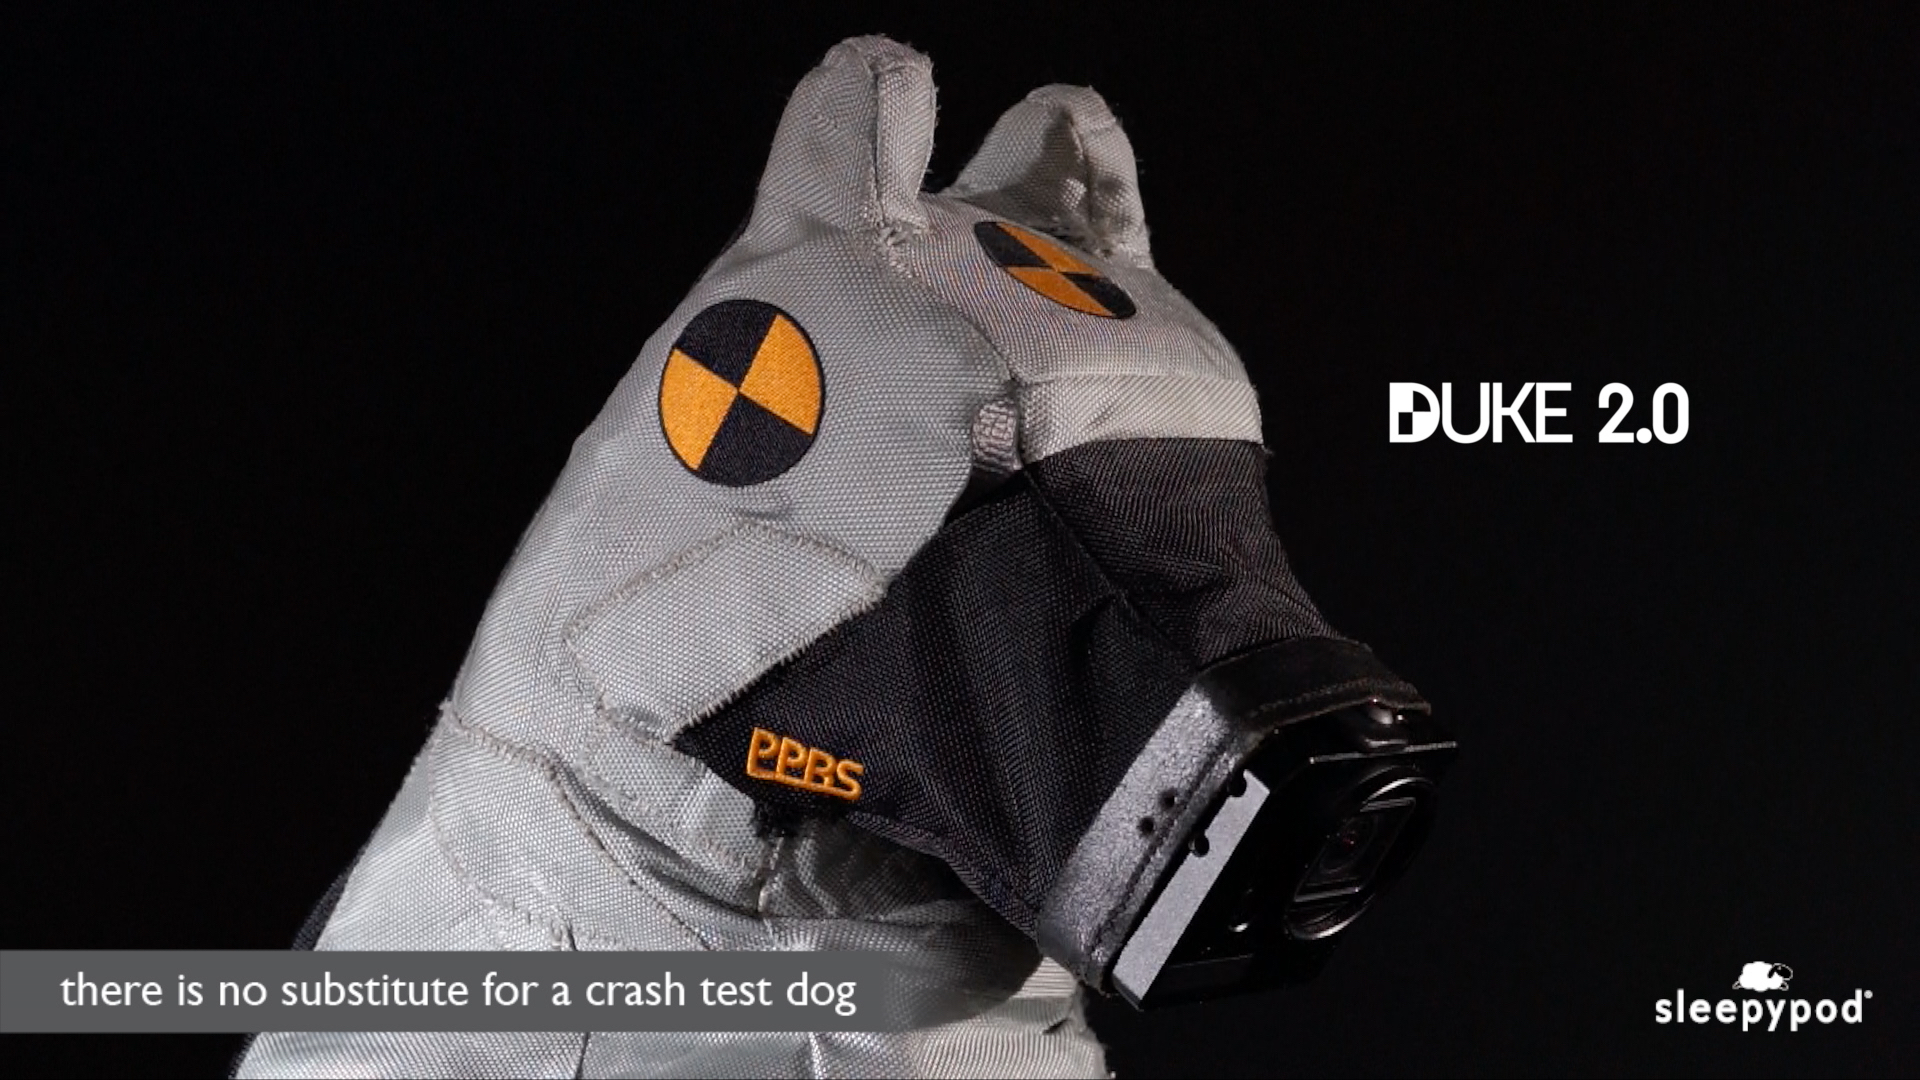 DUKE 2.0 - There is no substitute for a crash test dog.